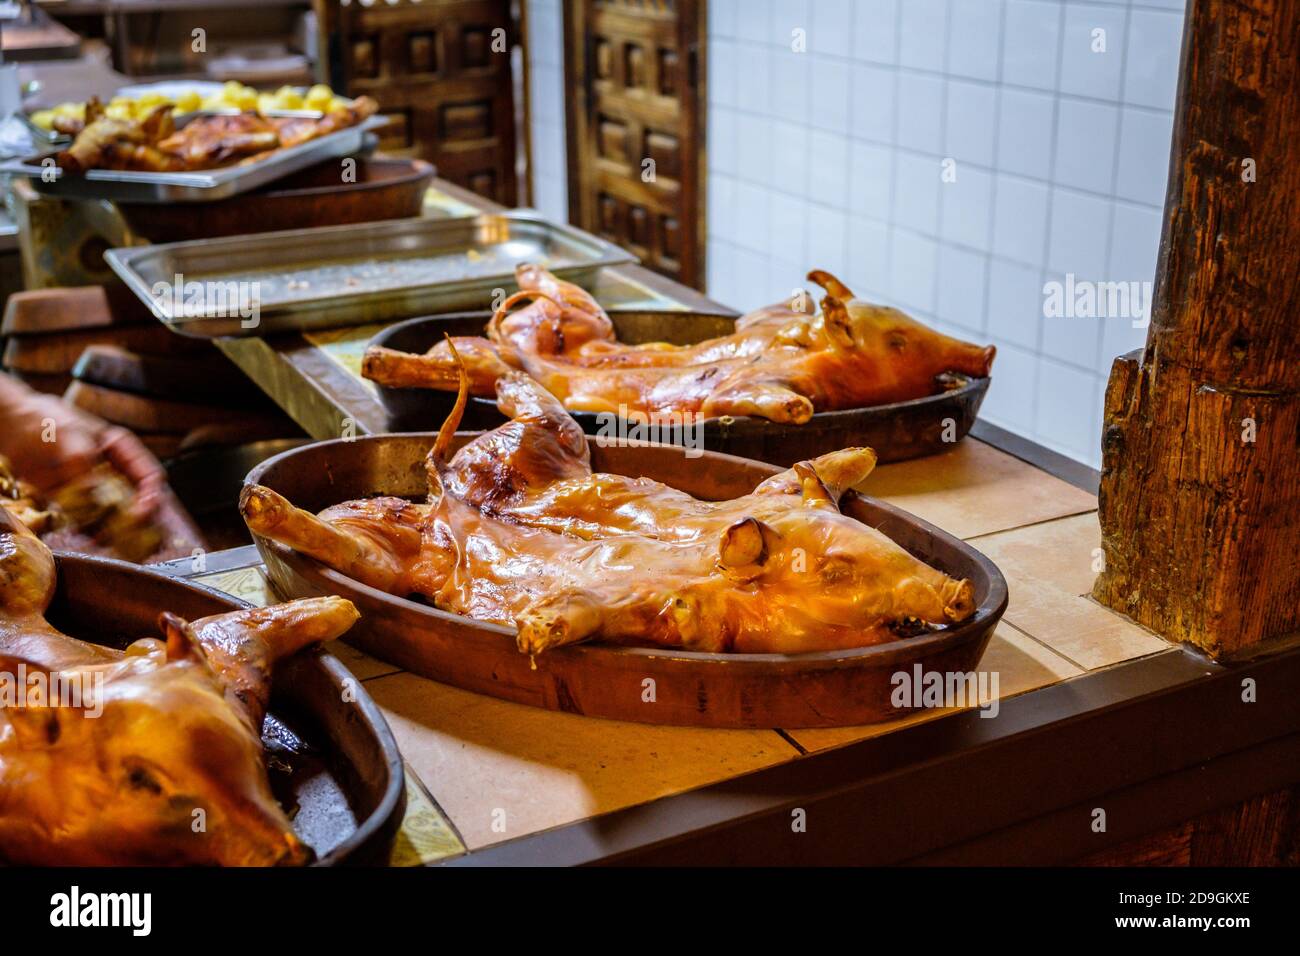 Roasted suckling pig served traditionally at a Spanish restaurant Stock Photo